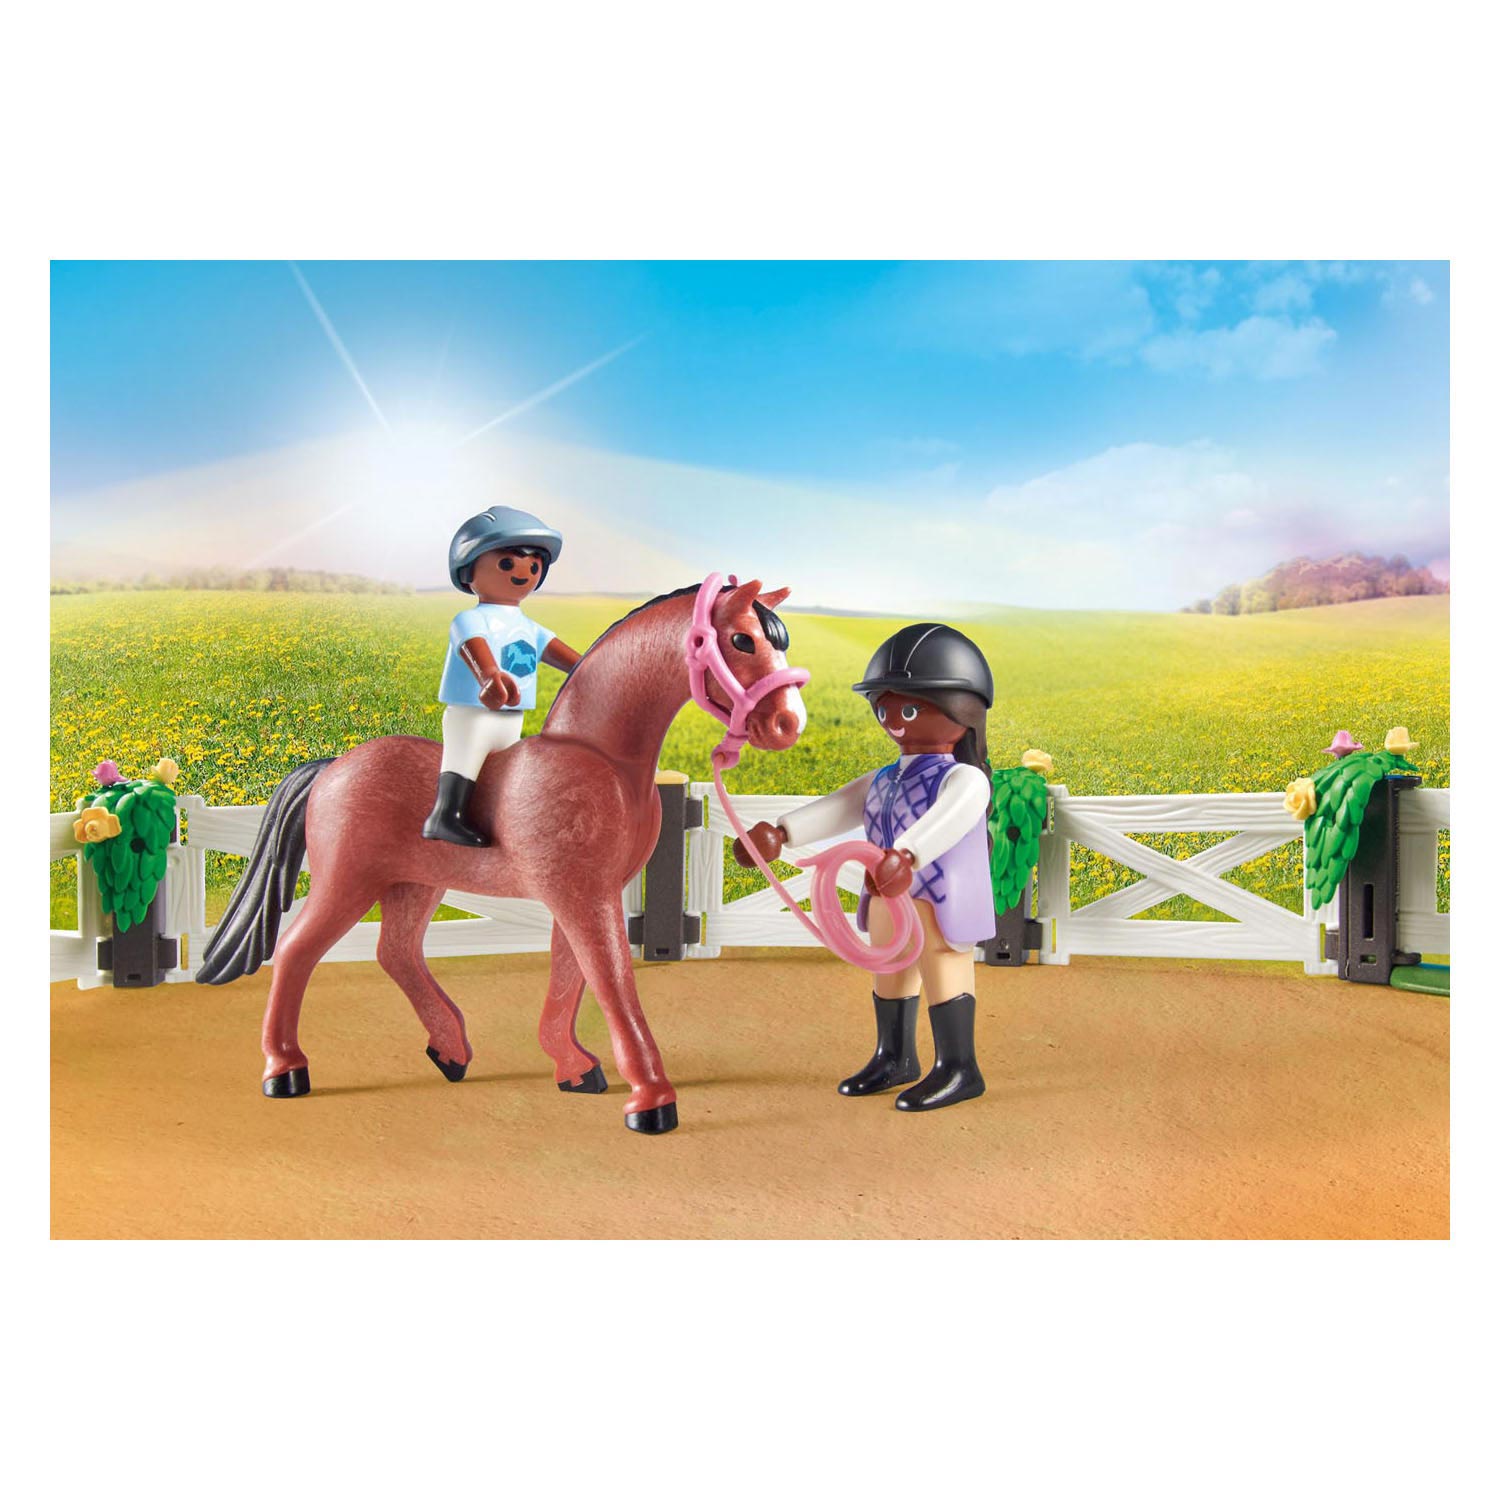 Playmobil Country 71238 Manege